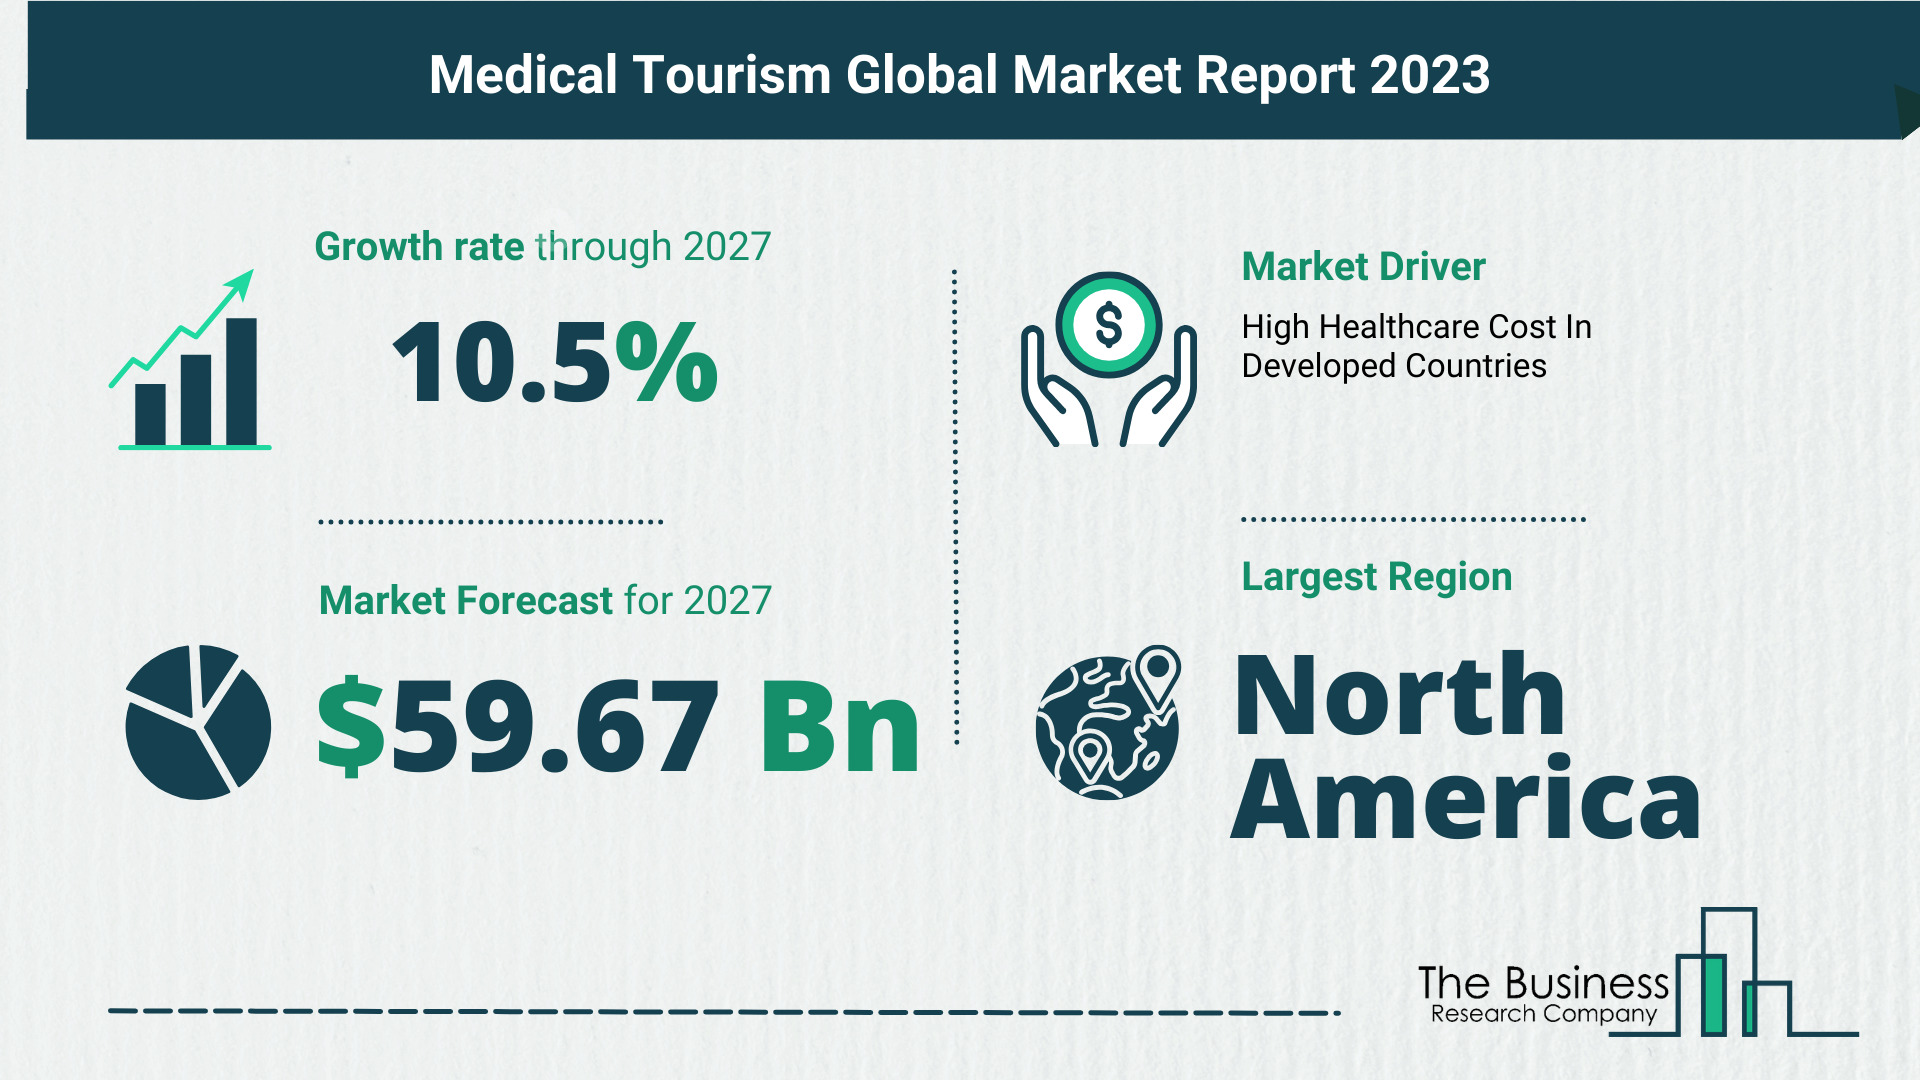 Global Medical Tourism Market Analysis: Estimated Market Size And Growth Rate